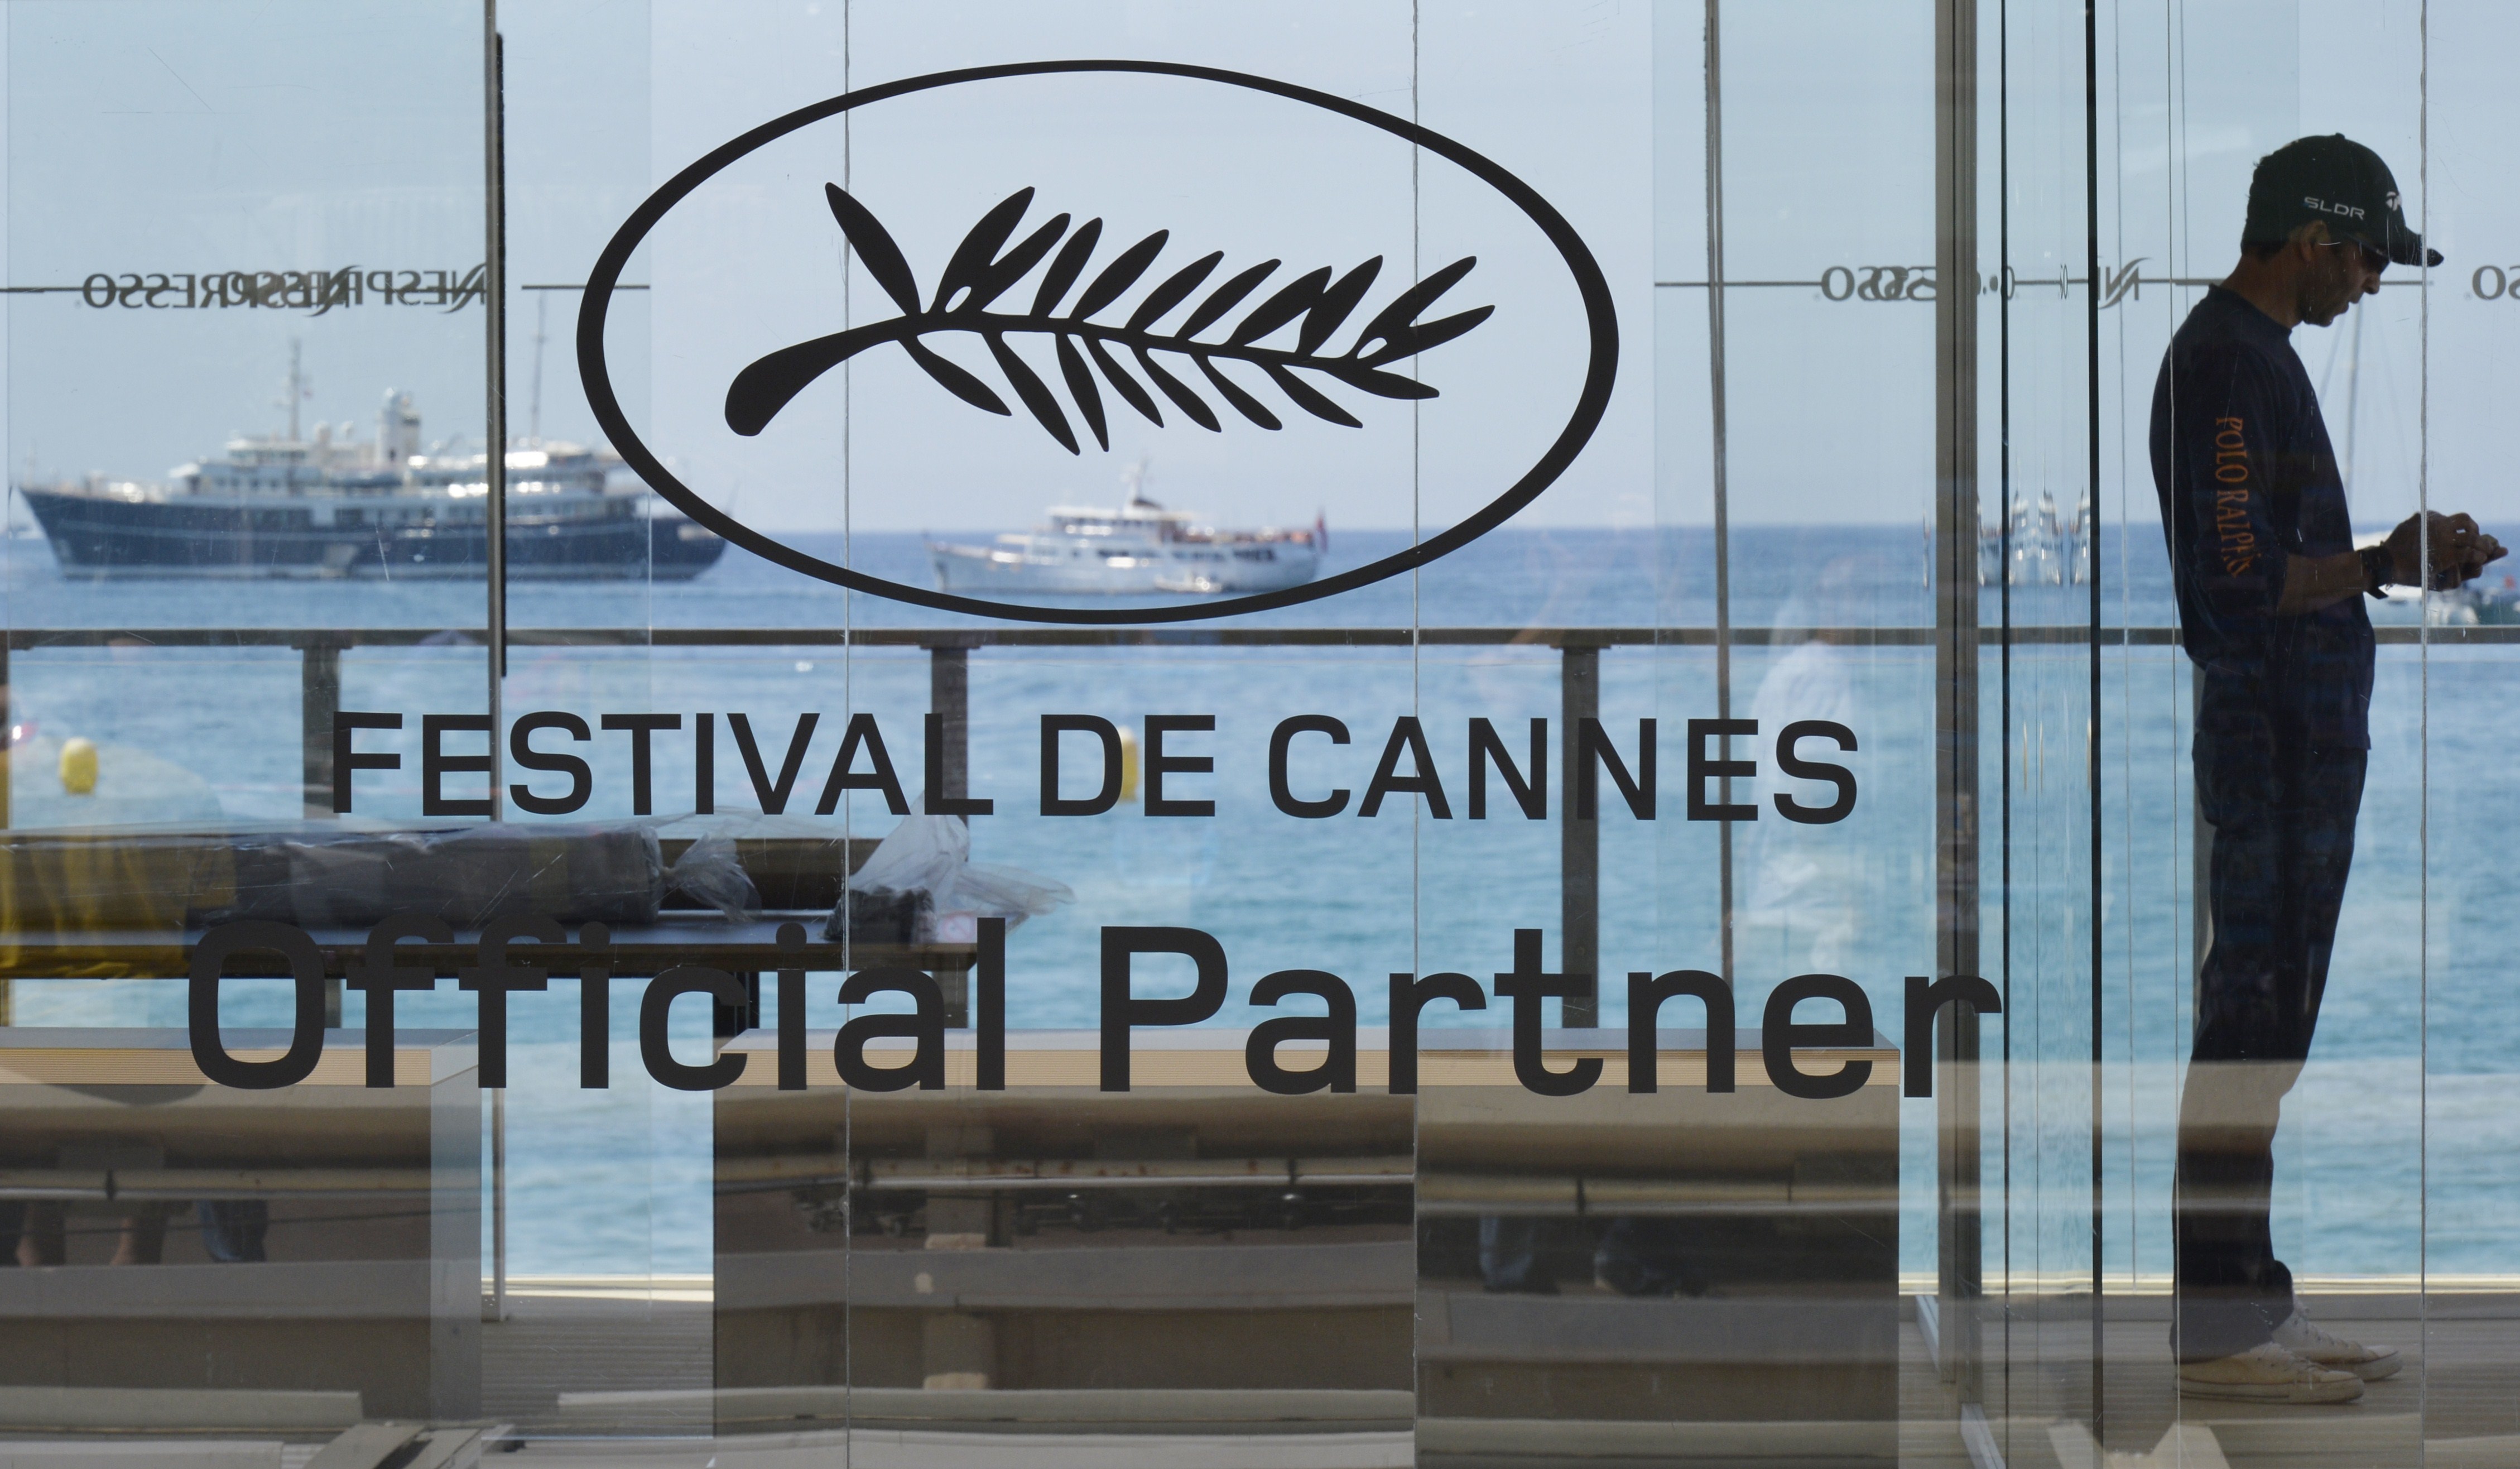 The logo of the festival on the eve of the 68th Cannes Film Festival in Cannes, southeastern France on May 12, 2015. (Loic Venance&mdash;AFP/Getty Images)